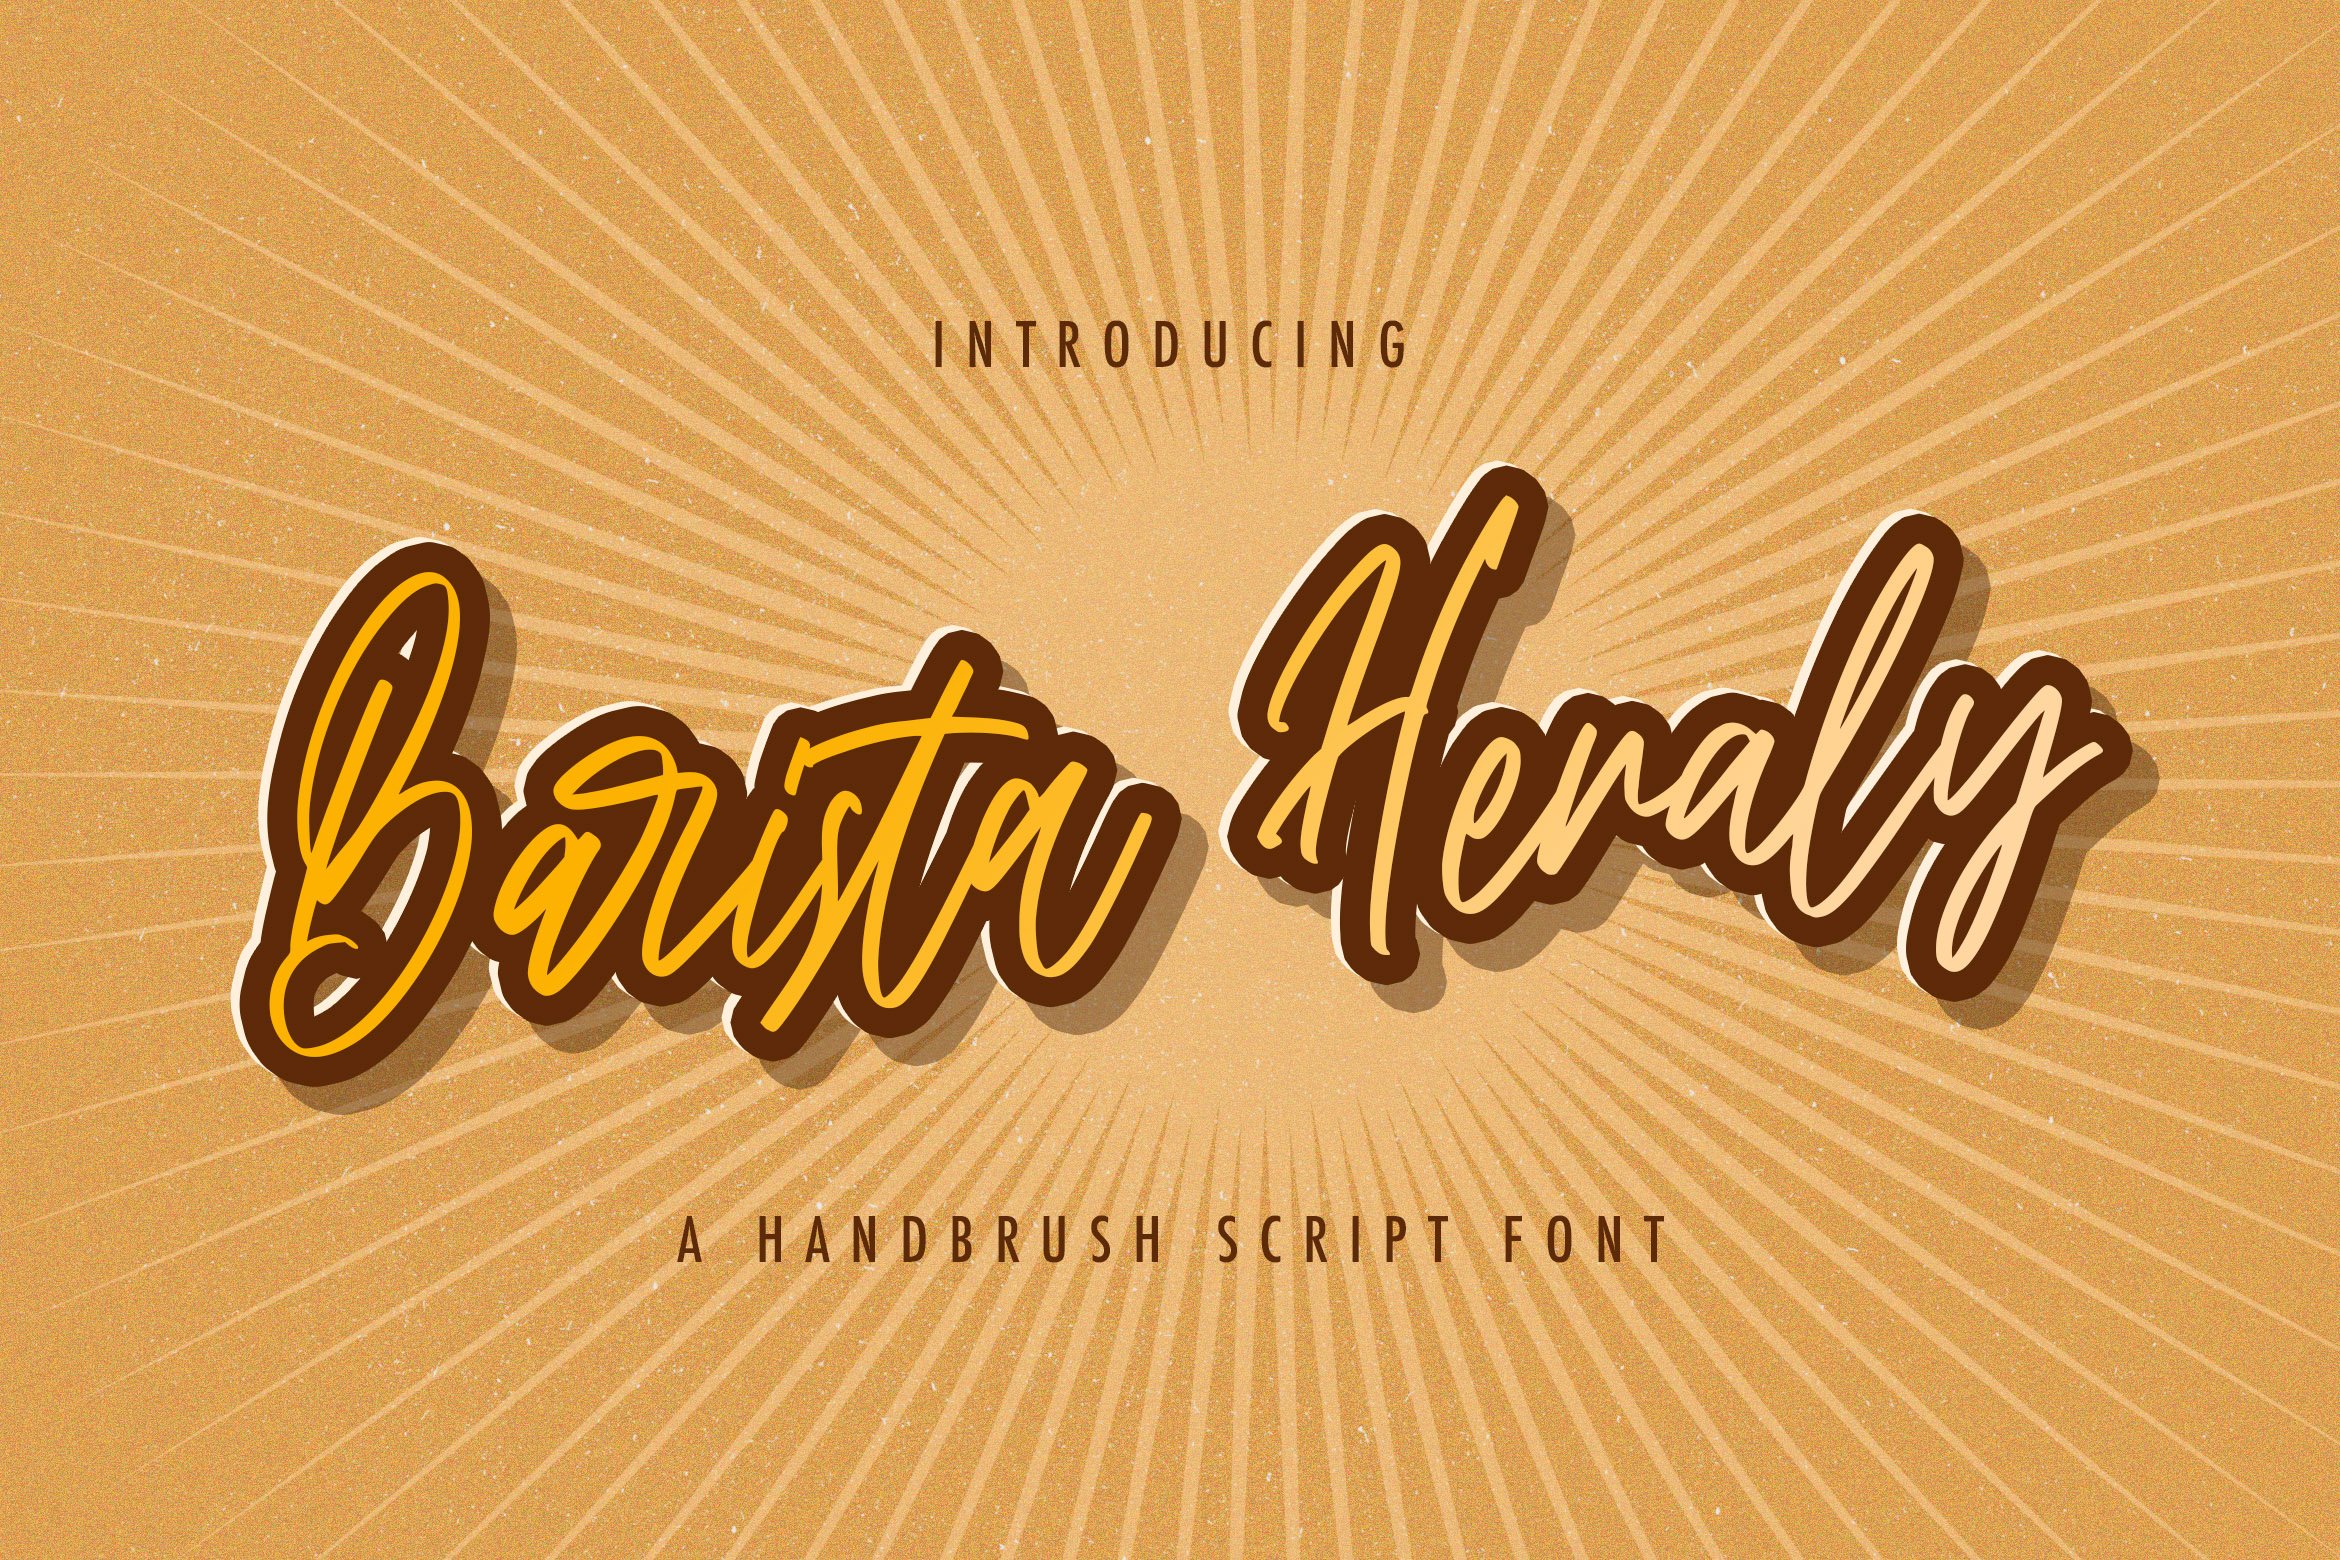 Barista Heraly - Handwritten Font cover image.